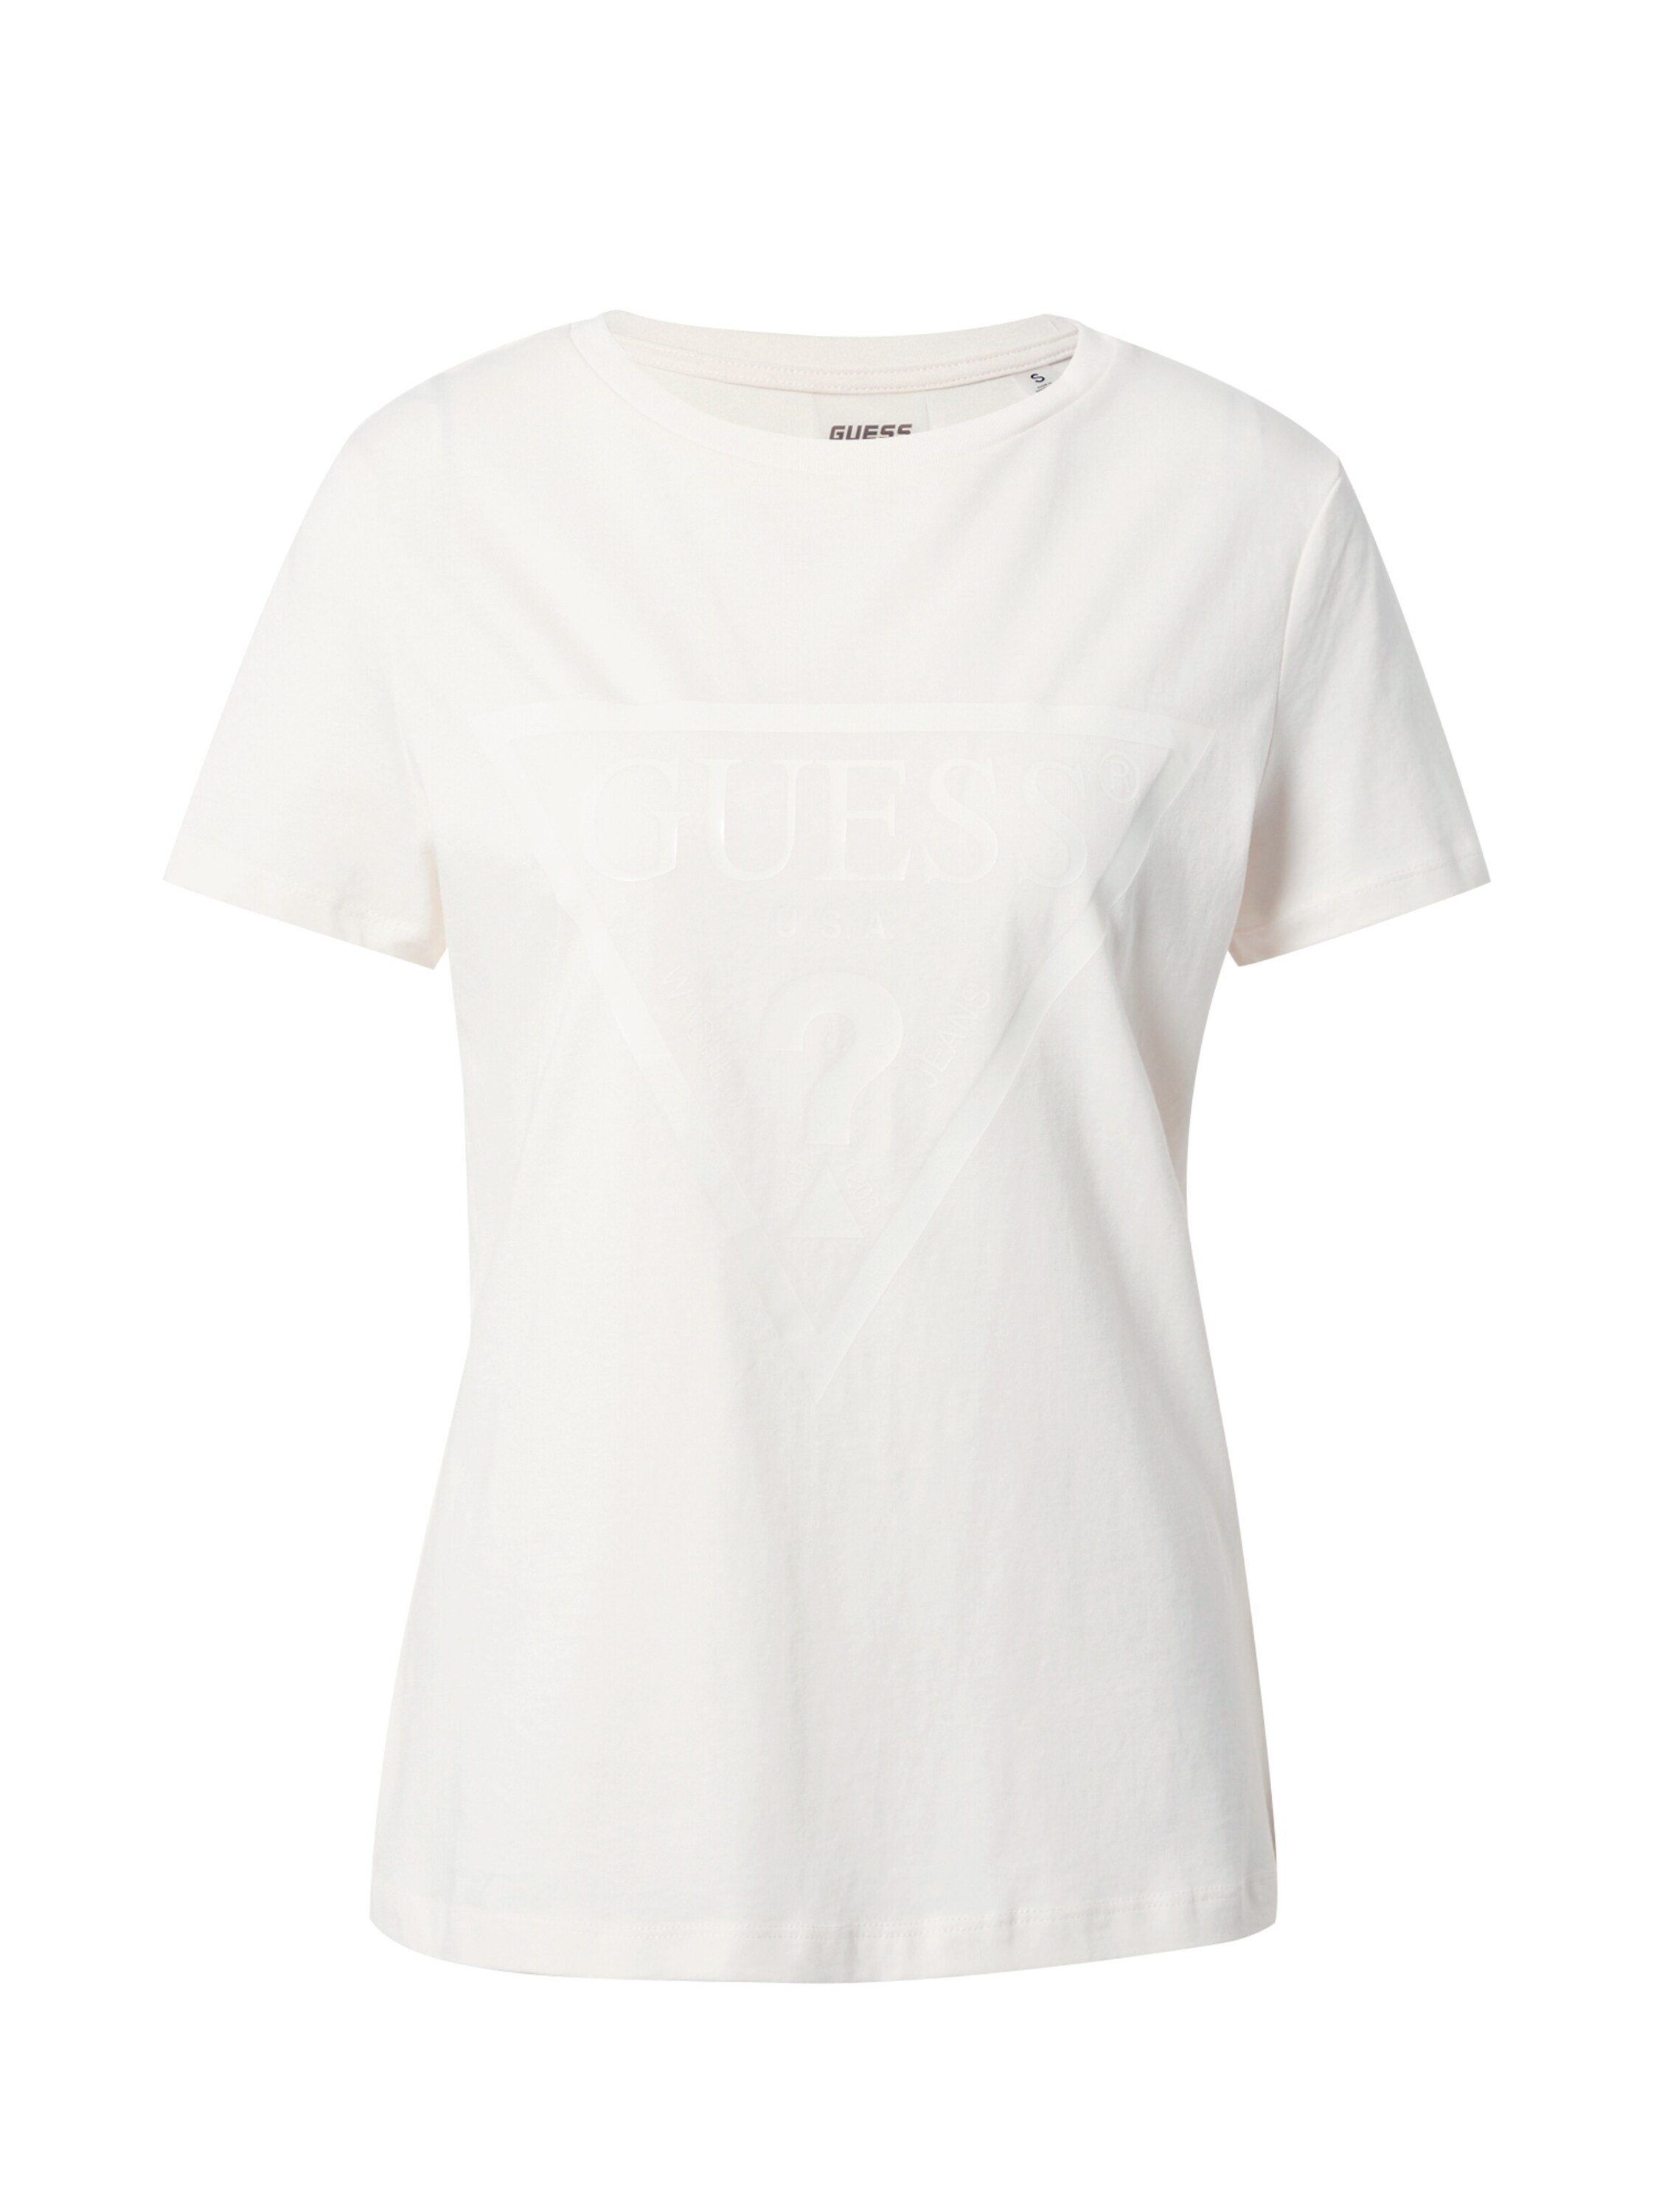 Guess T-Shirt Adele (1-tlg) Weiteres Detail, Plain/ohne Details